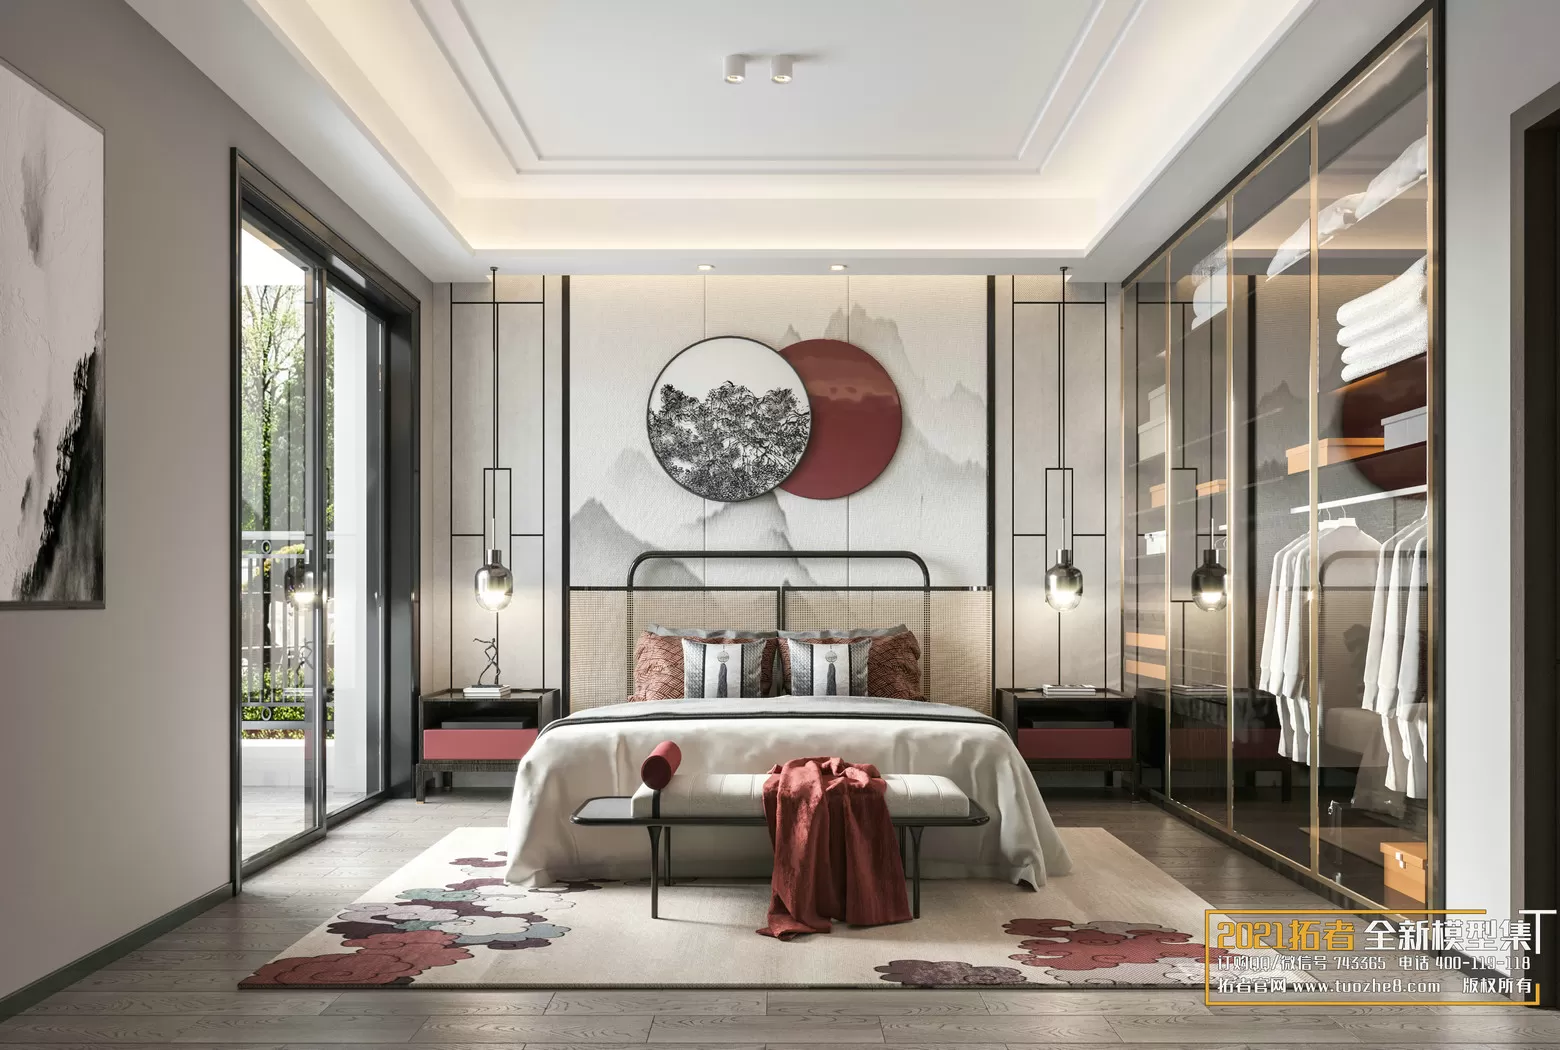 EXTENSION 2021 – 2. BEDROOM – 2.CHINESE STYLES – 3 – CORONA